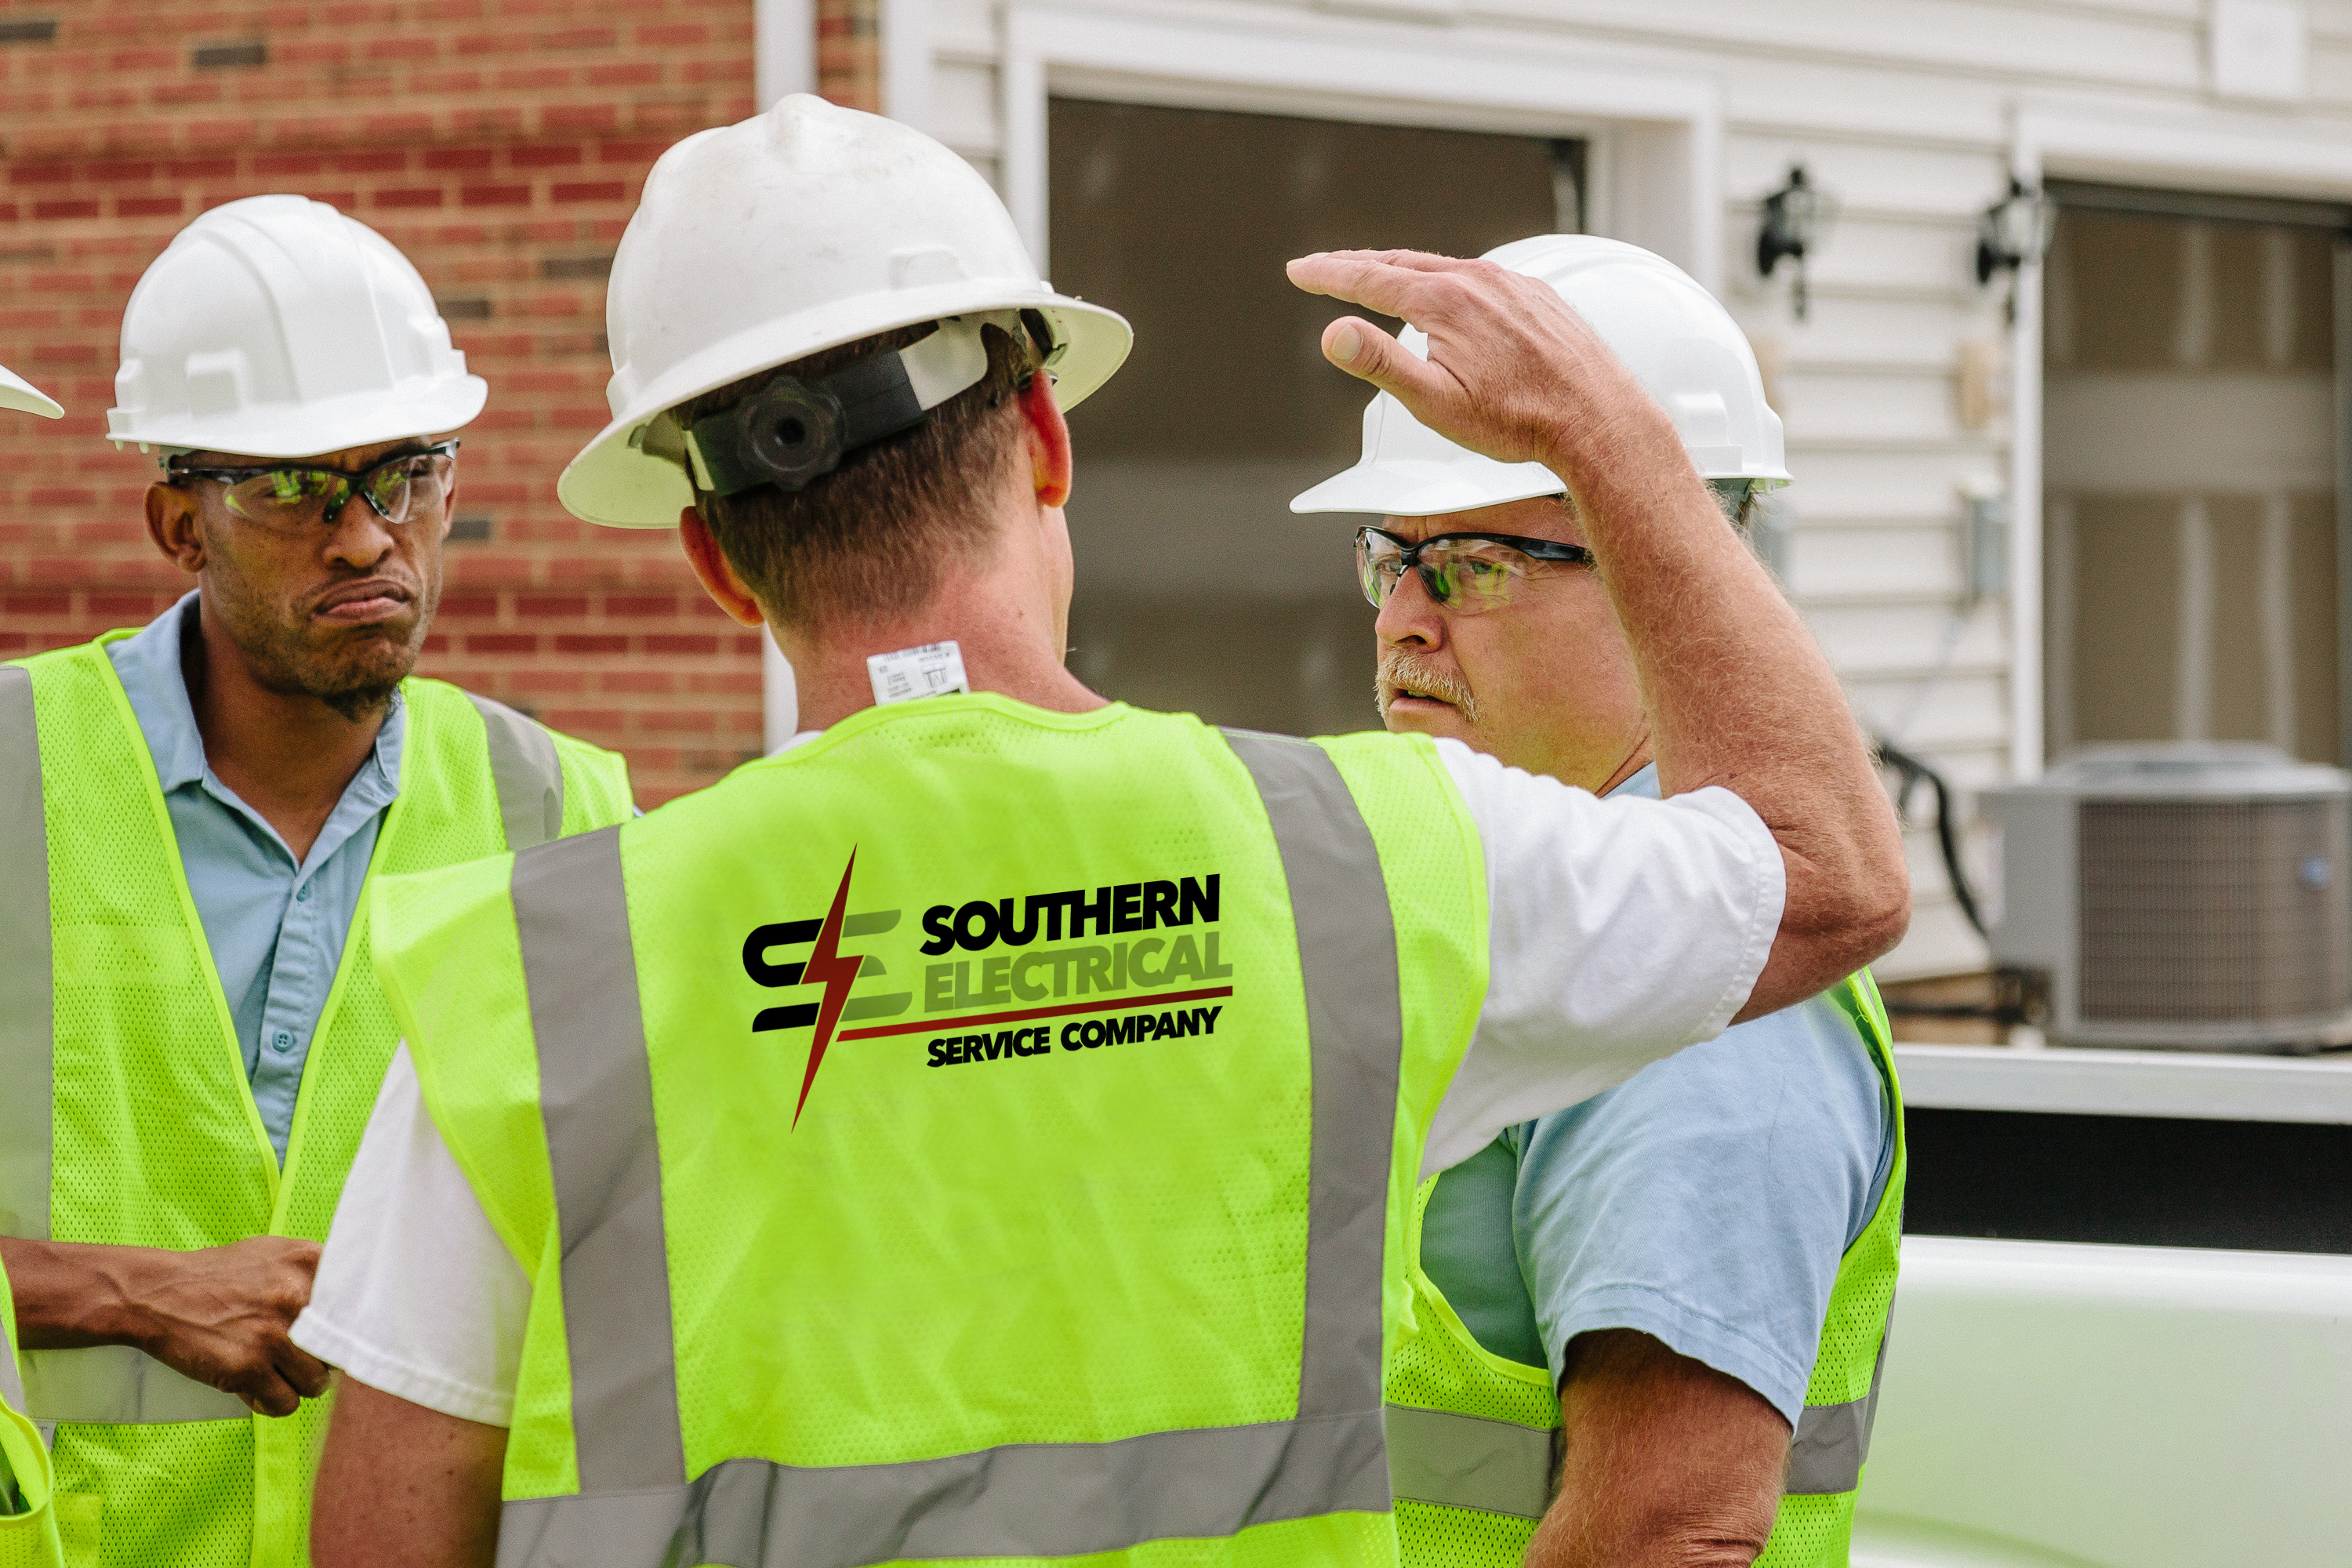 About the Power of Experience - SESCOS - Leesburg Based Electricians